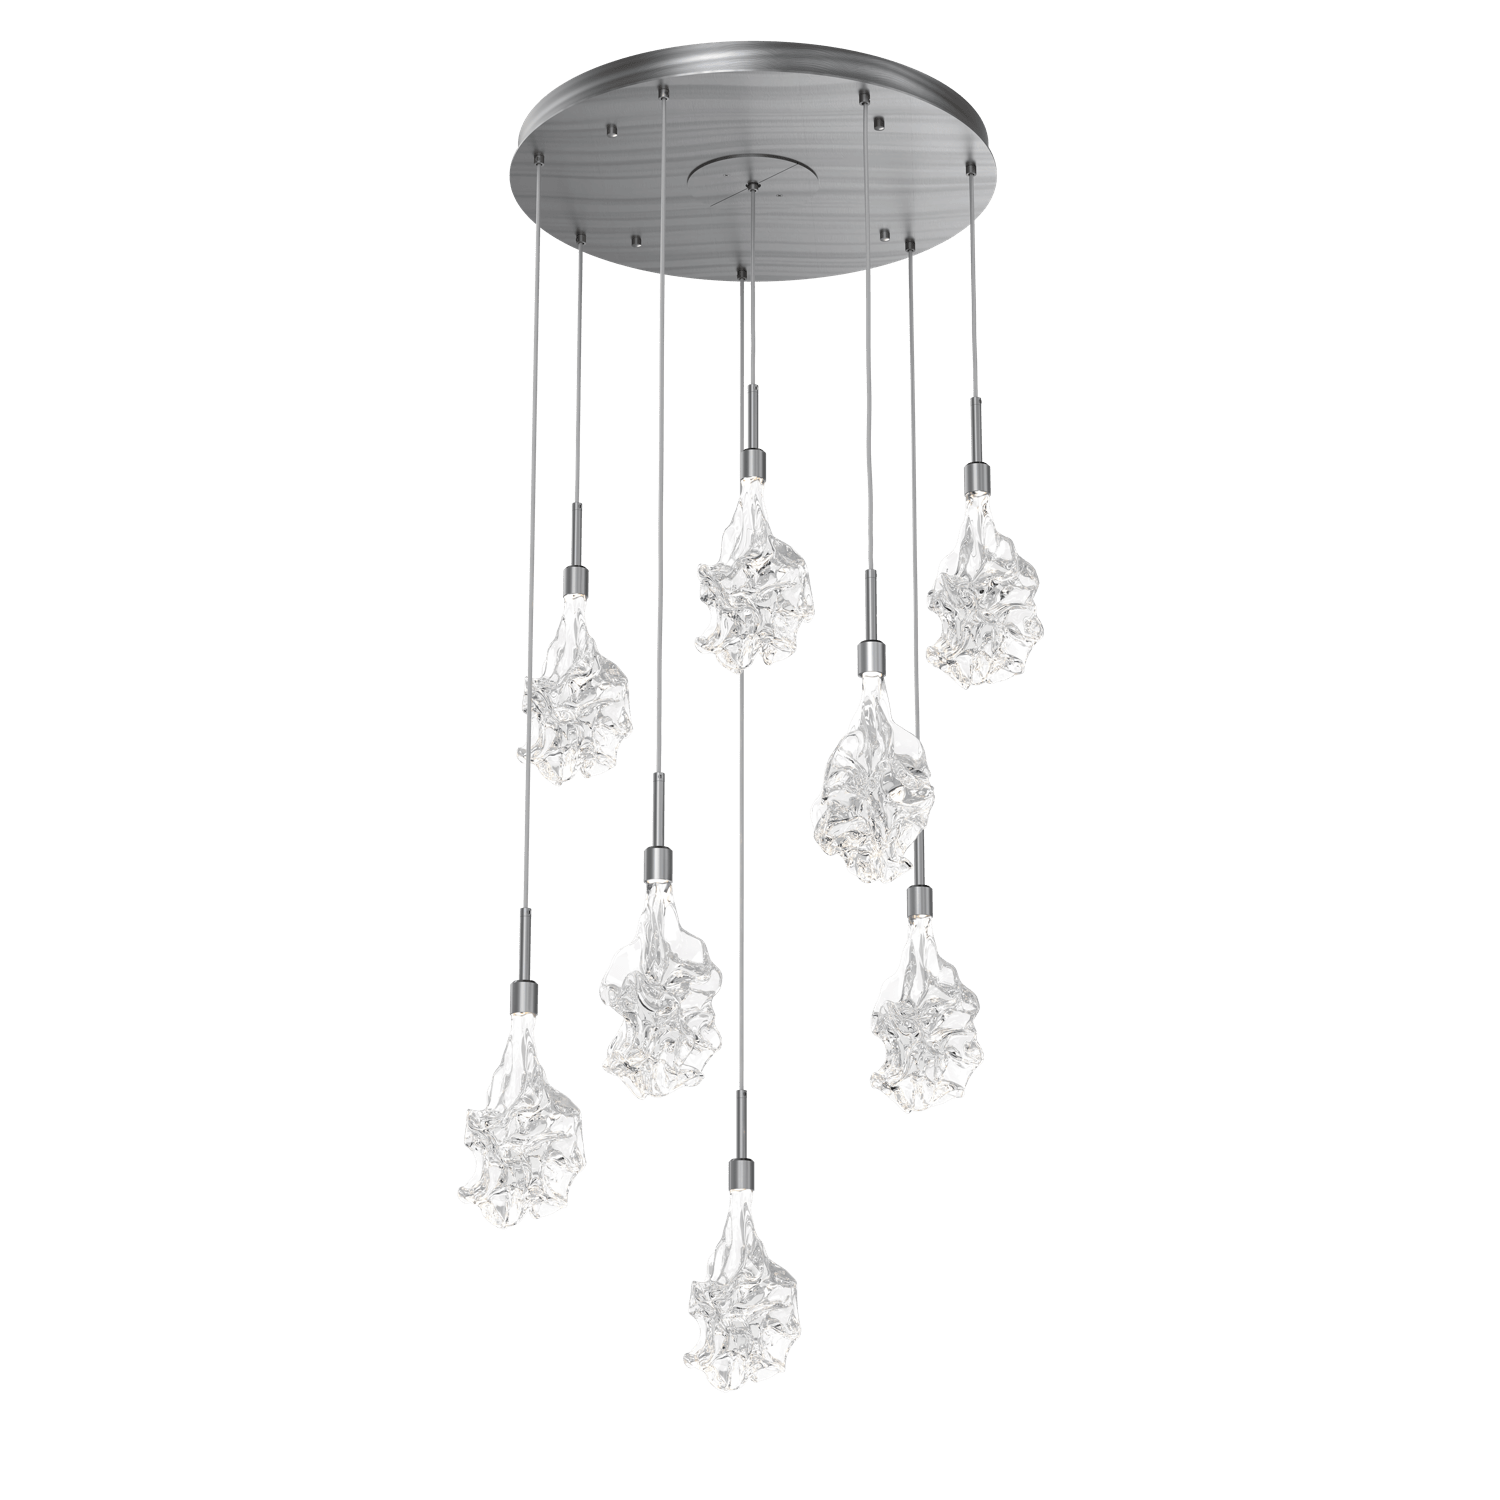 CHB0059-08-GM-Hammerton-Studio-Blossom-8-light-round-pendant-chandelier-with-gunmetal-finish-and-clear-handblown-crystal-glass-shades-and-LED-lamping